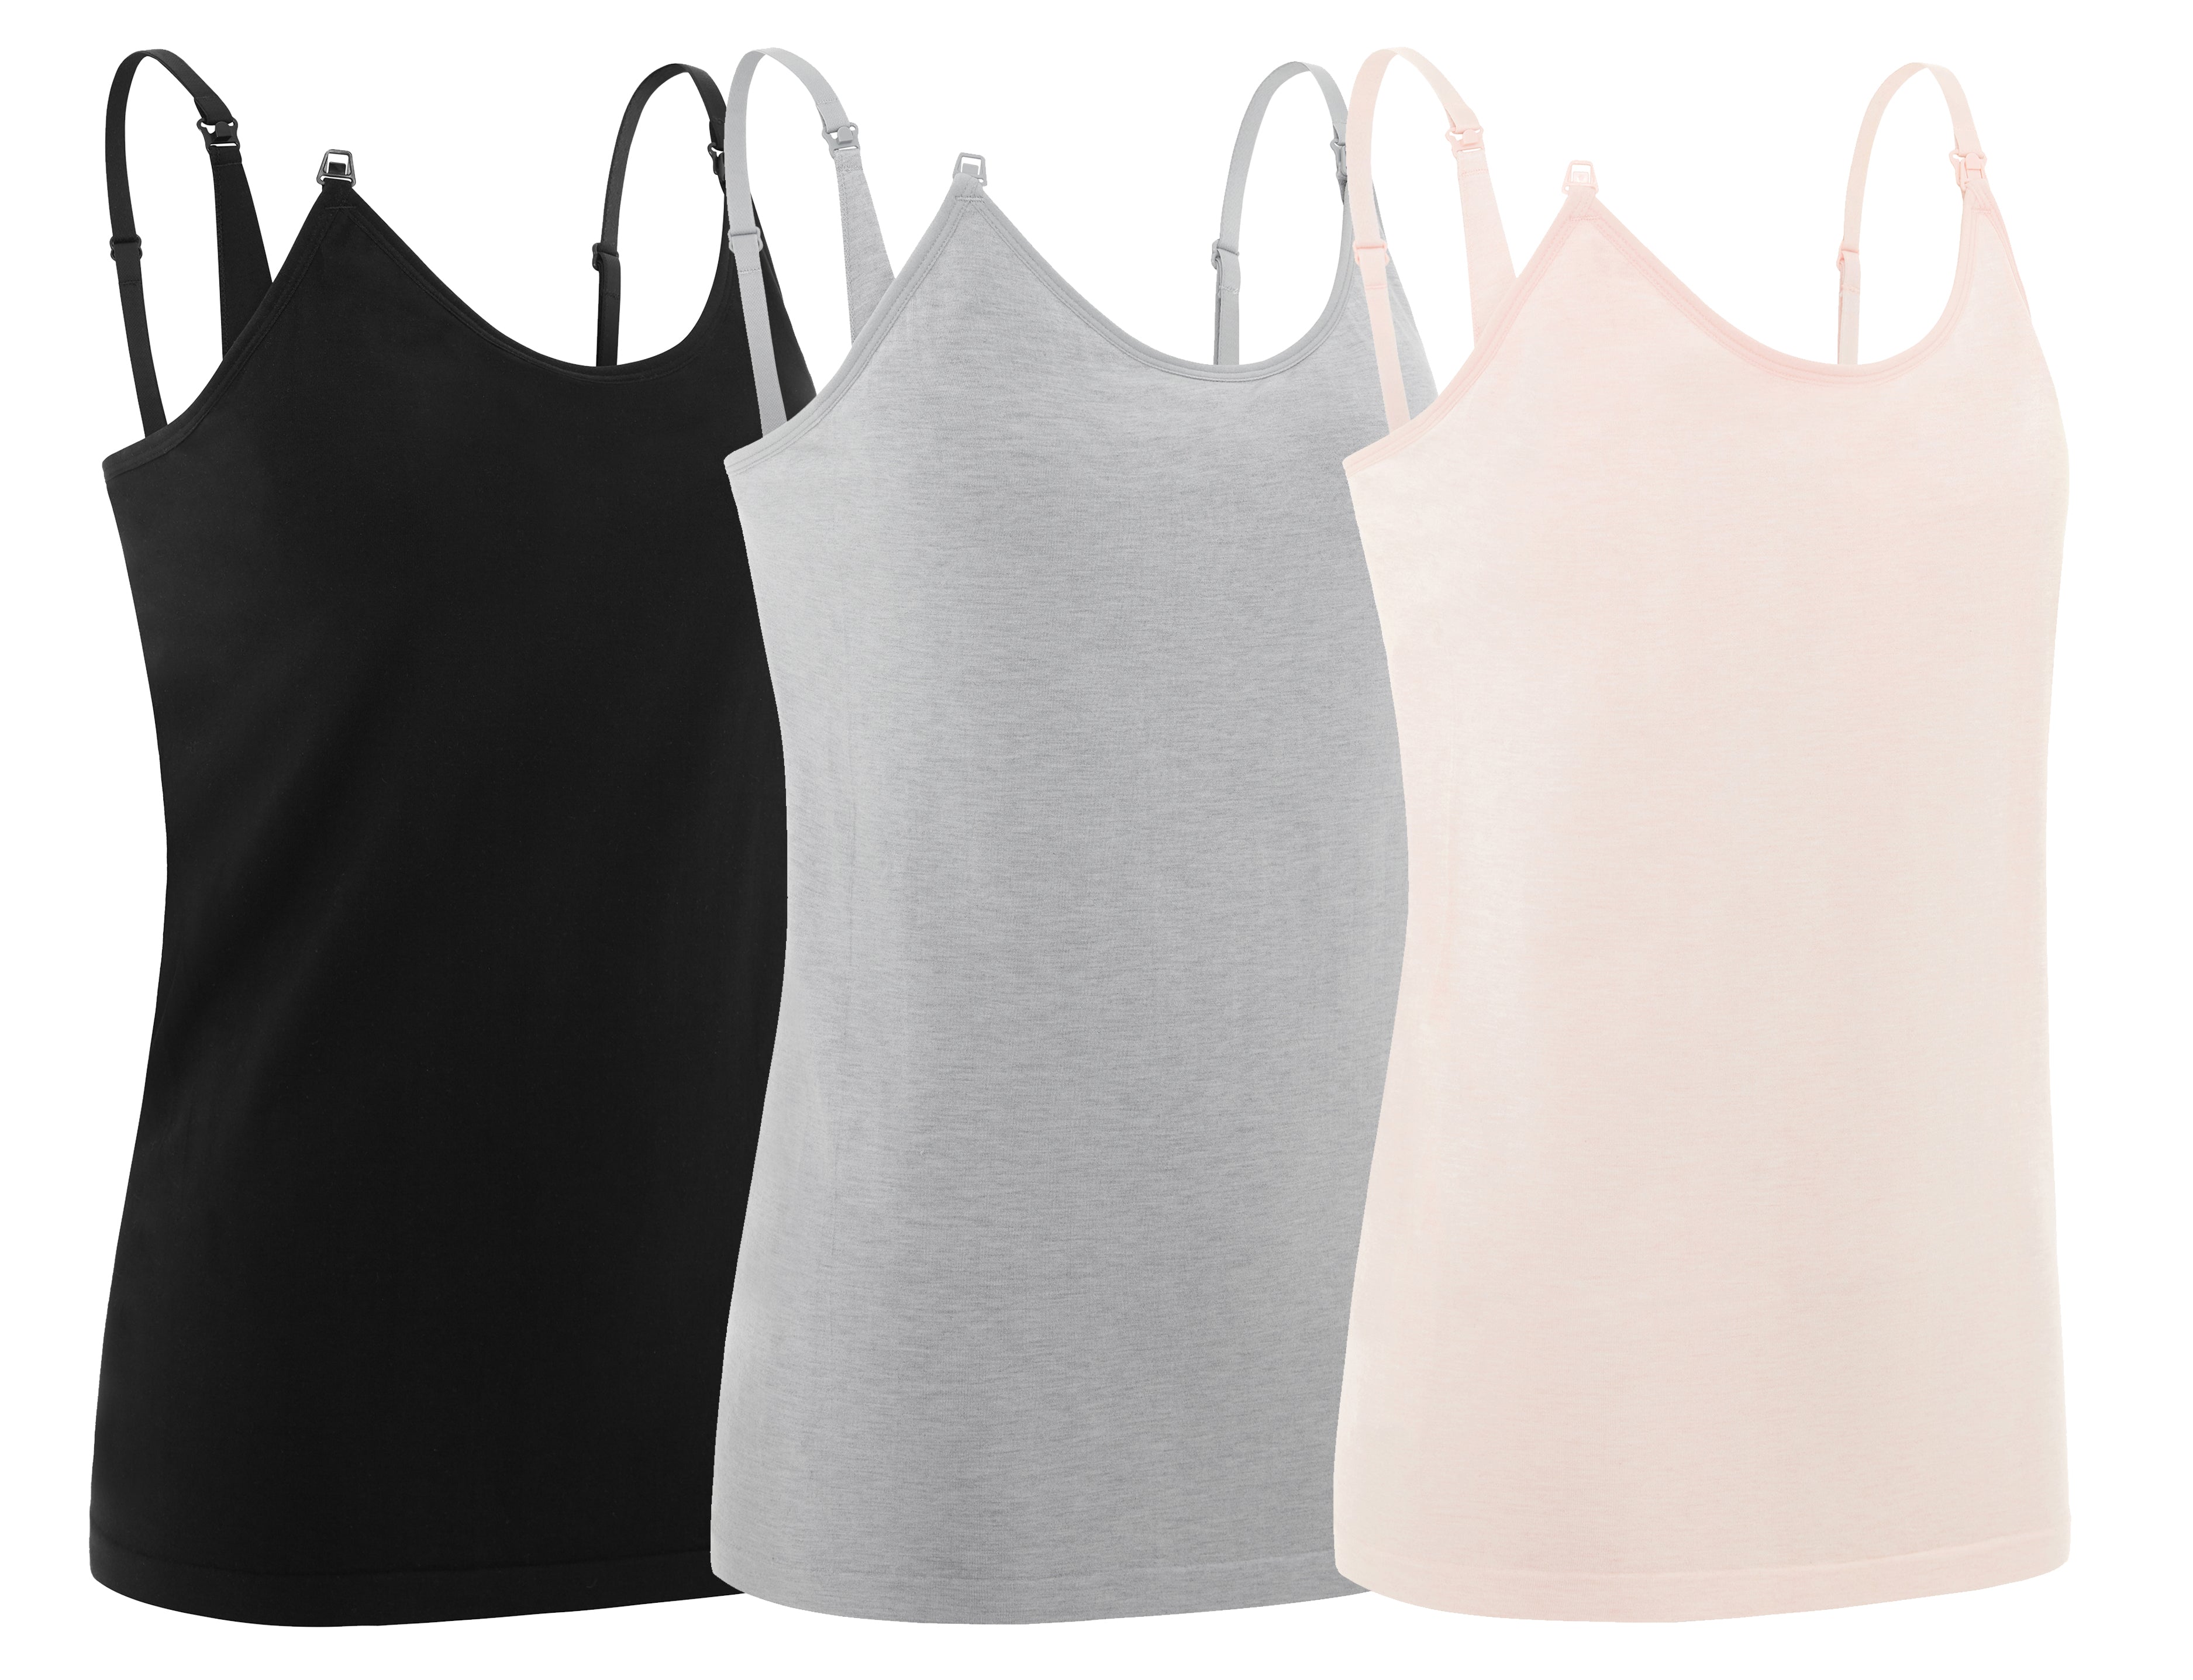 Under Control |Maternity Camisole 3 (Black/Grey/Pink) Pack